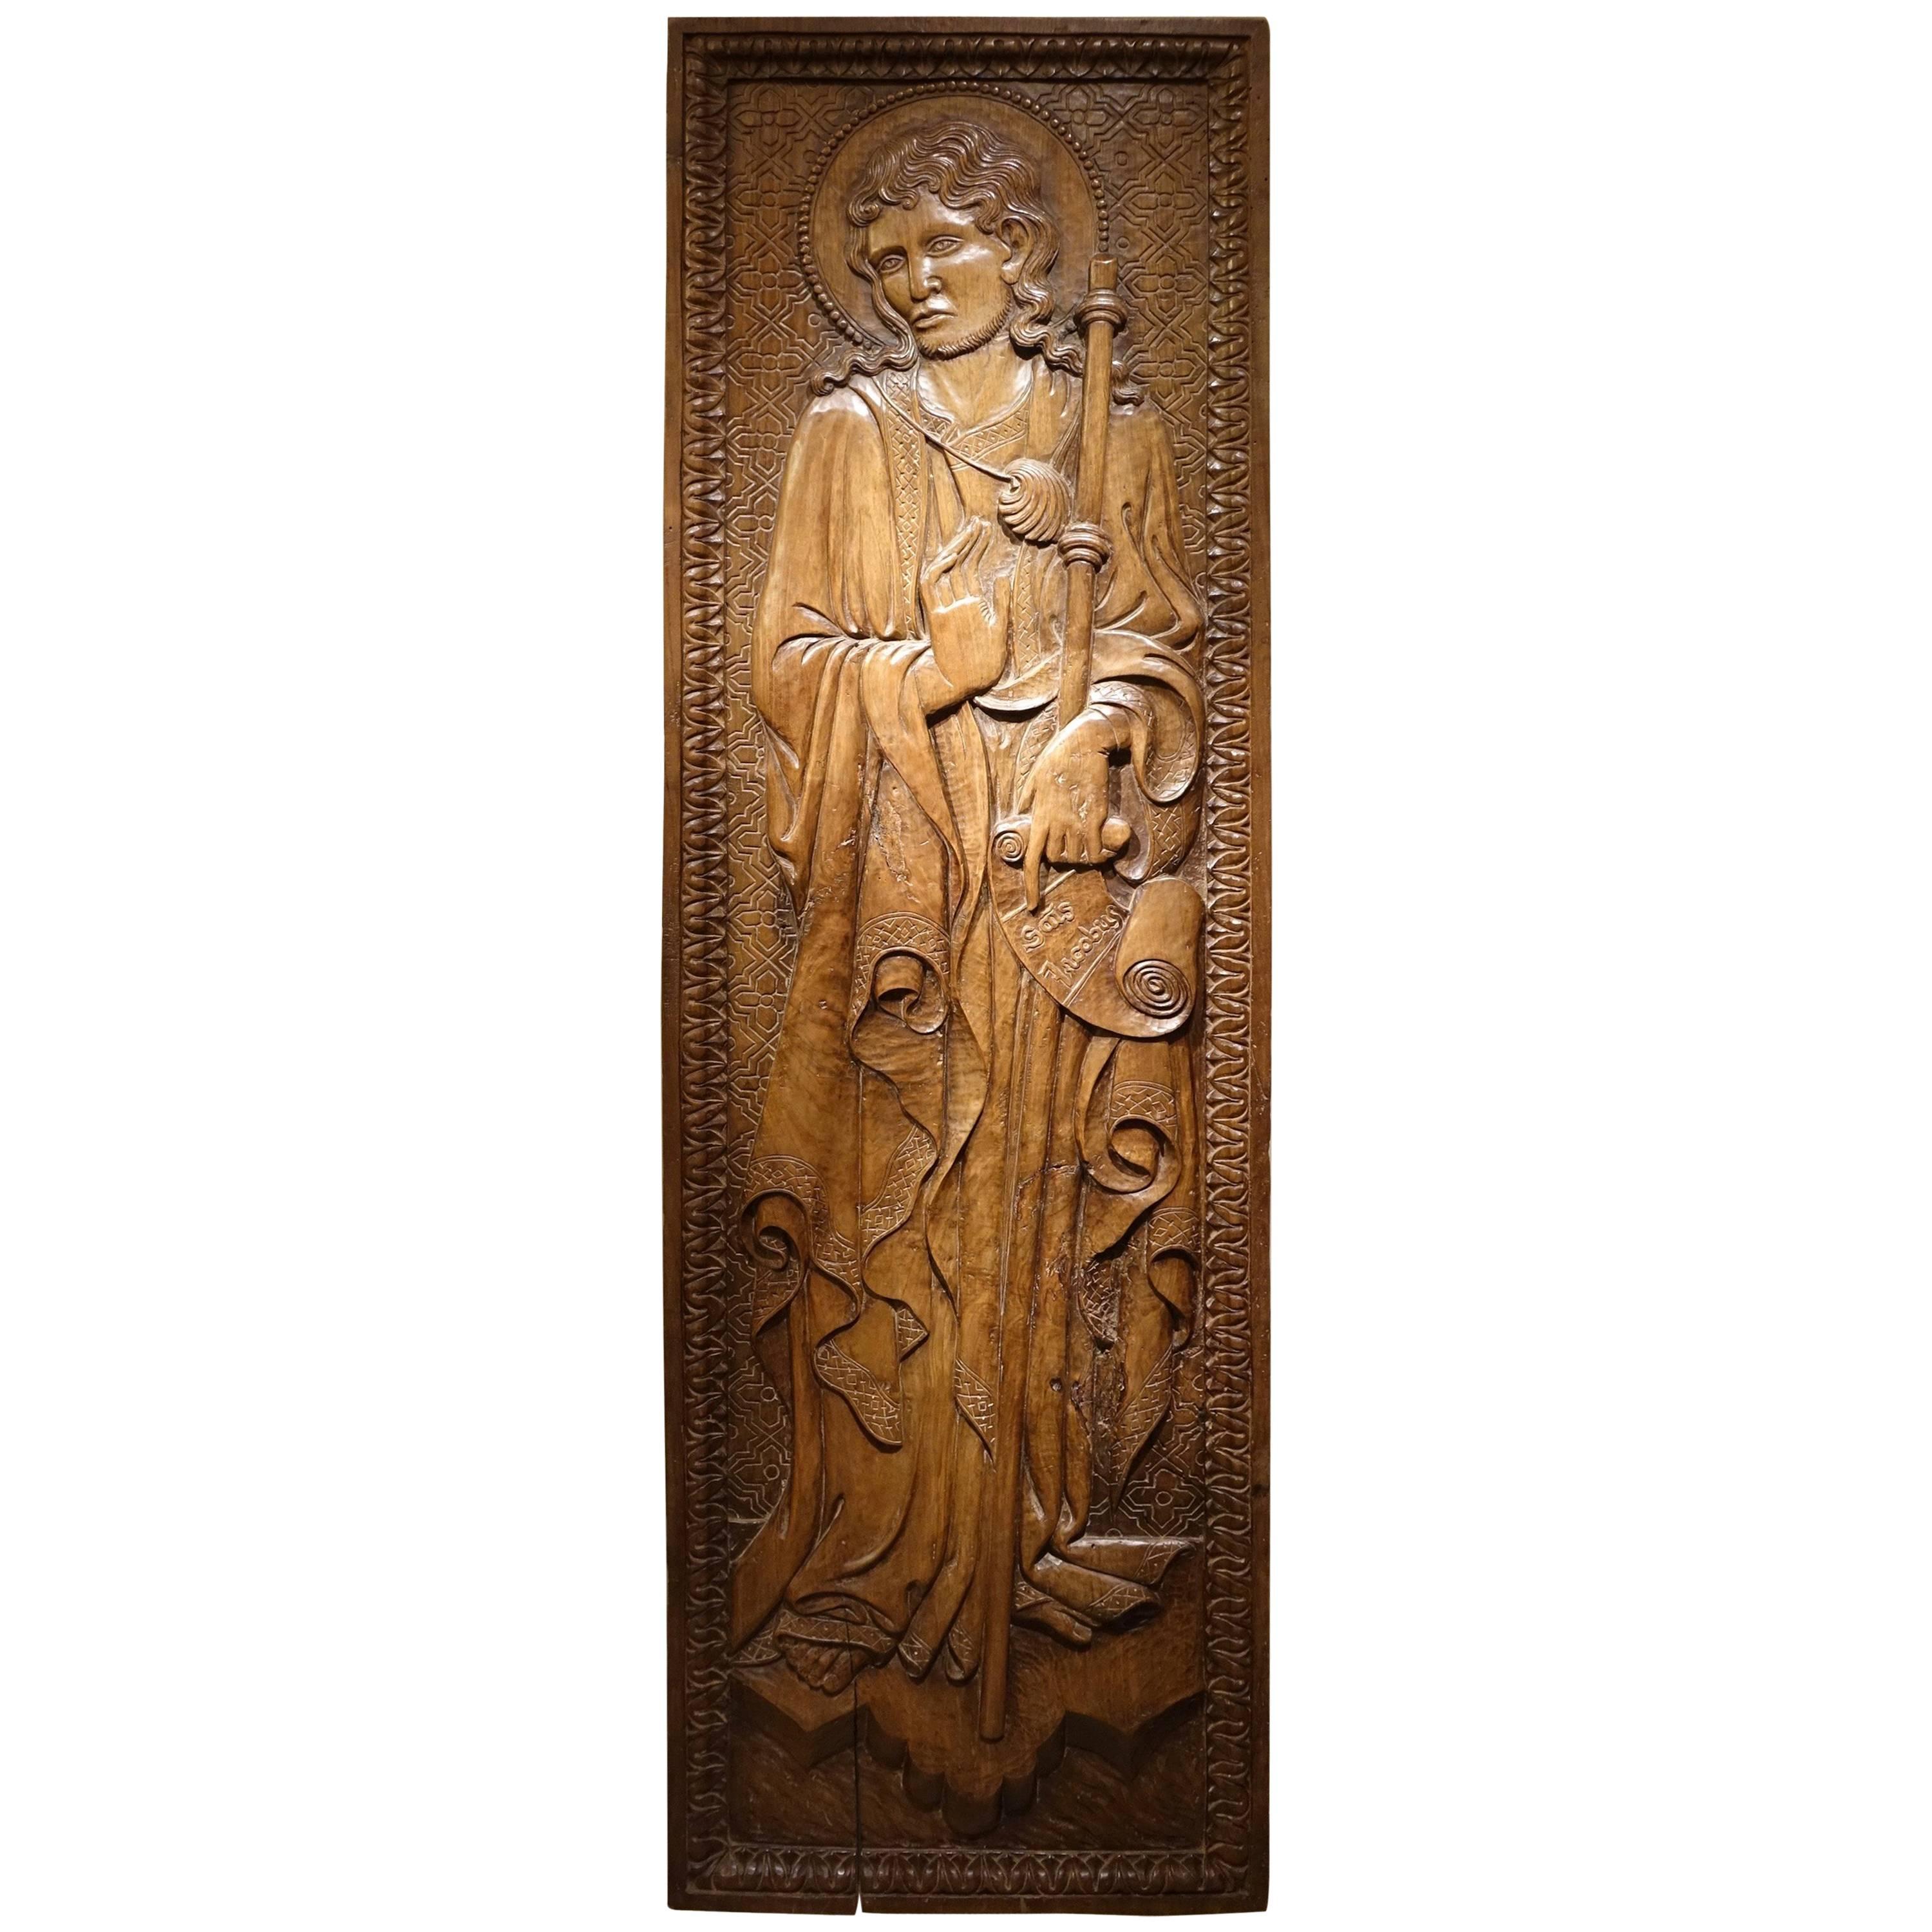  Bas Relief in Walnut Wood Representing Saint James, Venice, circa 1550, Italy  For Sale